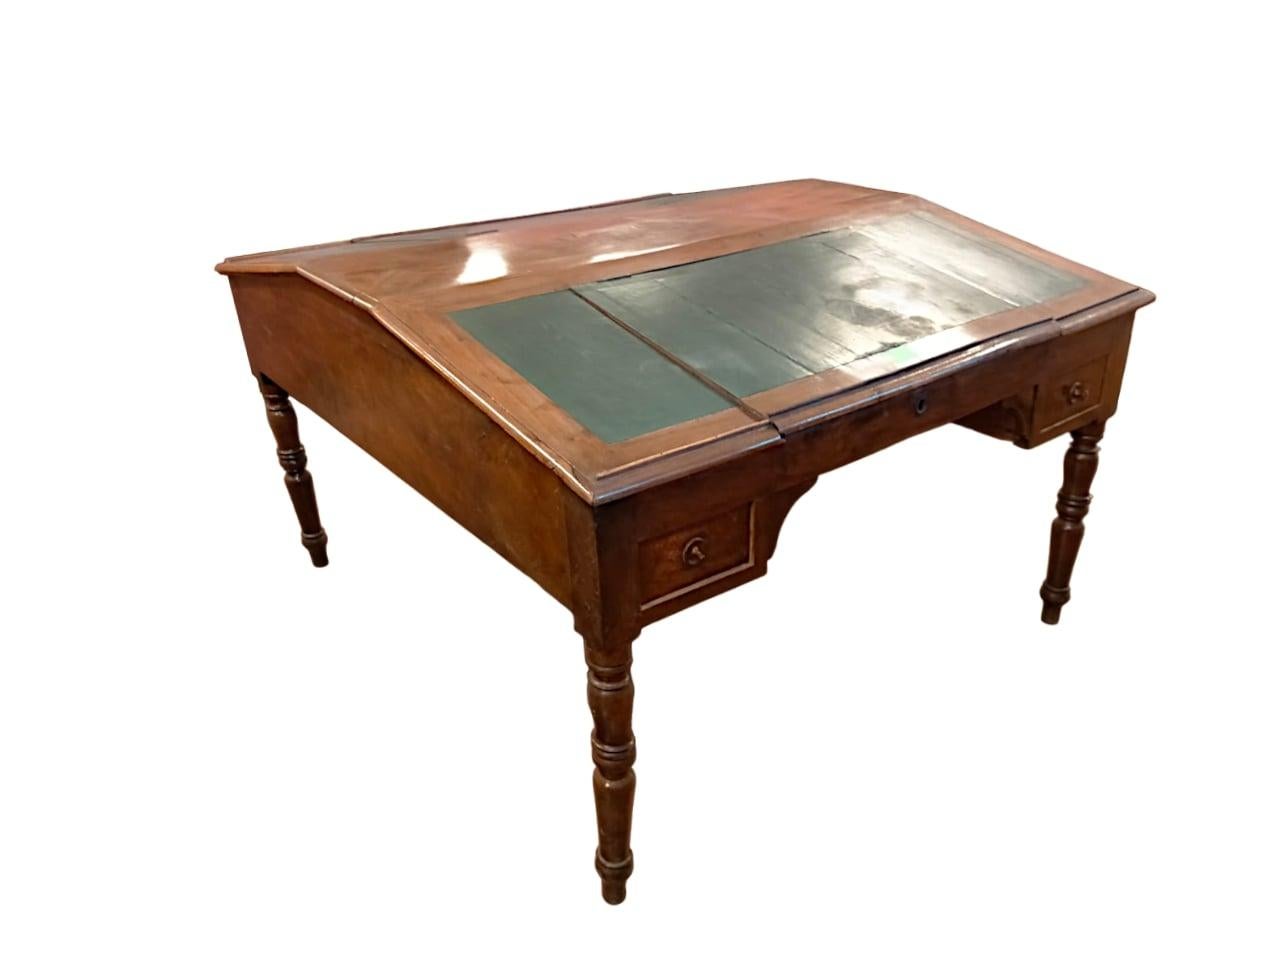 Double desk with opening desks

Double desk with tilting and opening desks, inside two large compartments, 
Each side of the desk has 2 drawers.
The cabinet is solid walnut, in first patina, circa 1850.
Turned legs.
Epoch: ca. 1850.

Measurements: